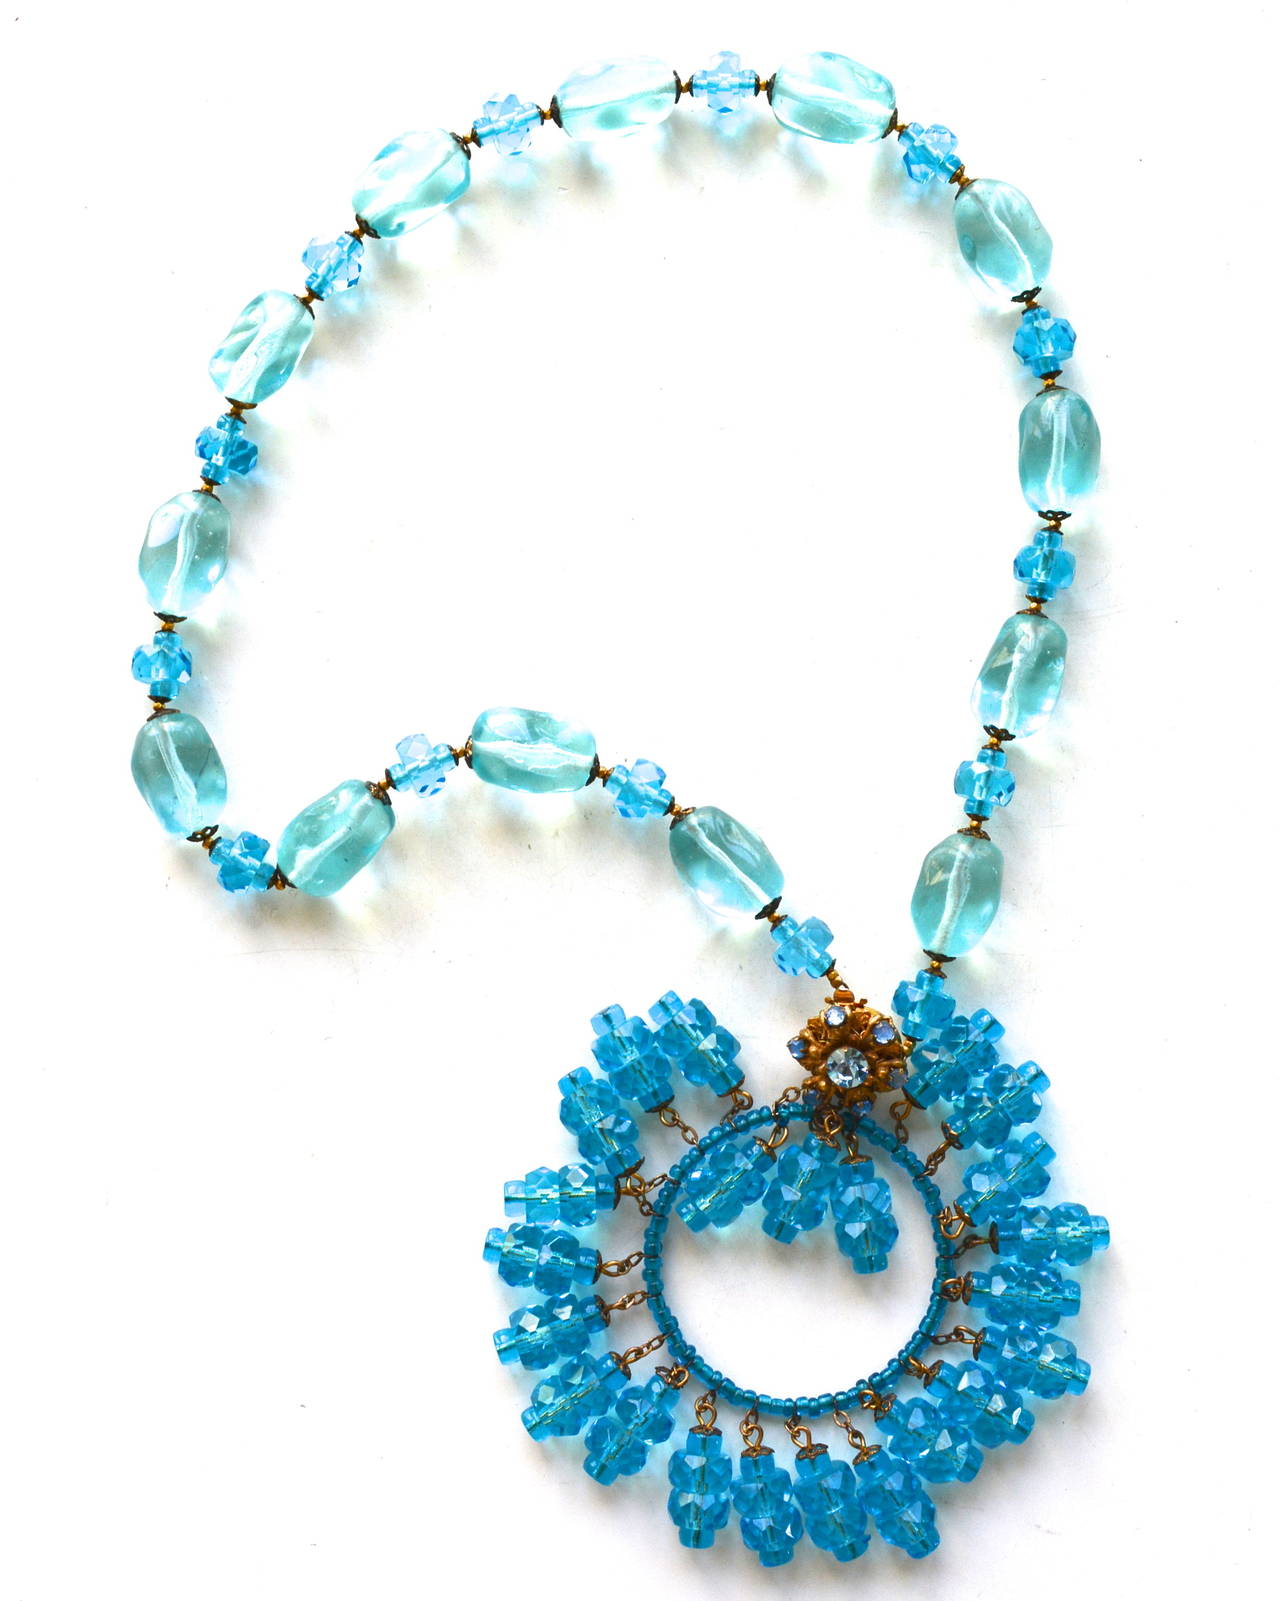 Wonderful faceted crystal and glass bead Miriam Haskell necklace. The vibrant turquoise blue and aquamarine nuances are quite gorgeous. The metal has a matte gilt finish. Excellent condition. The necklace measures about 18